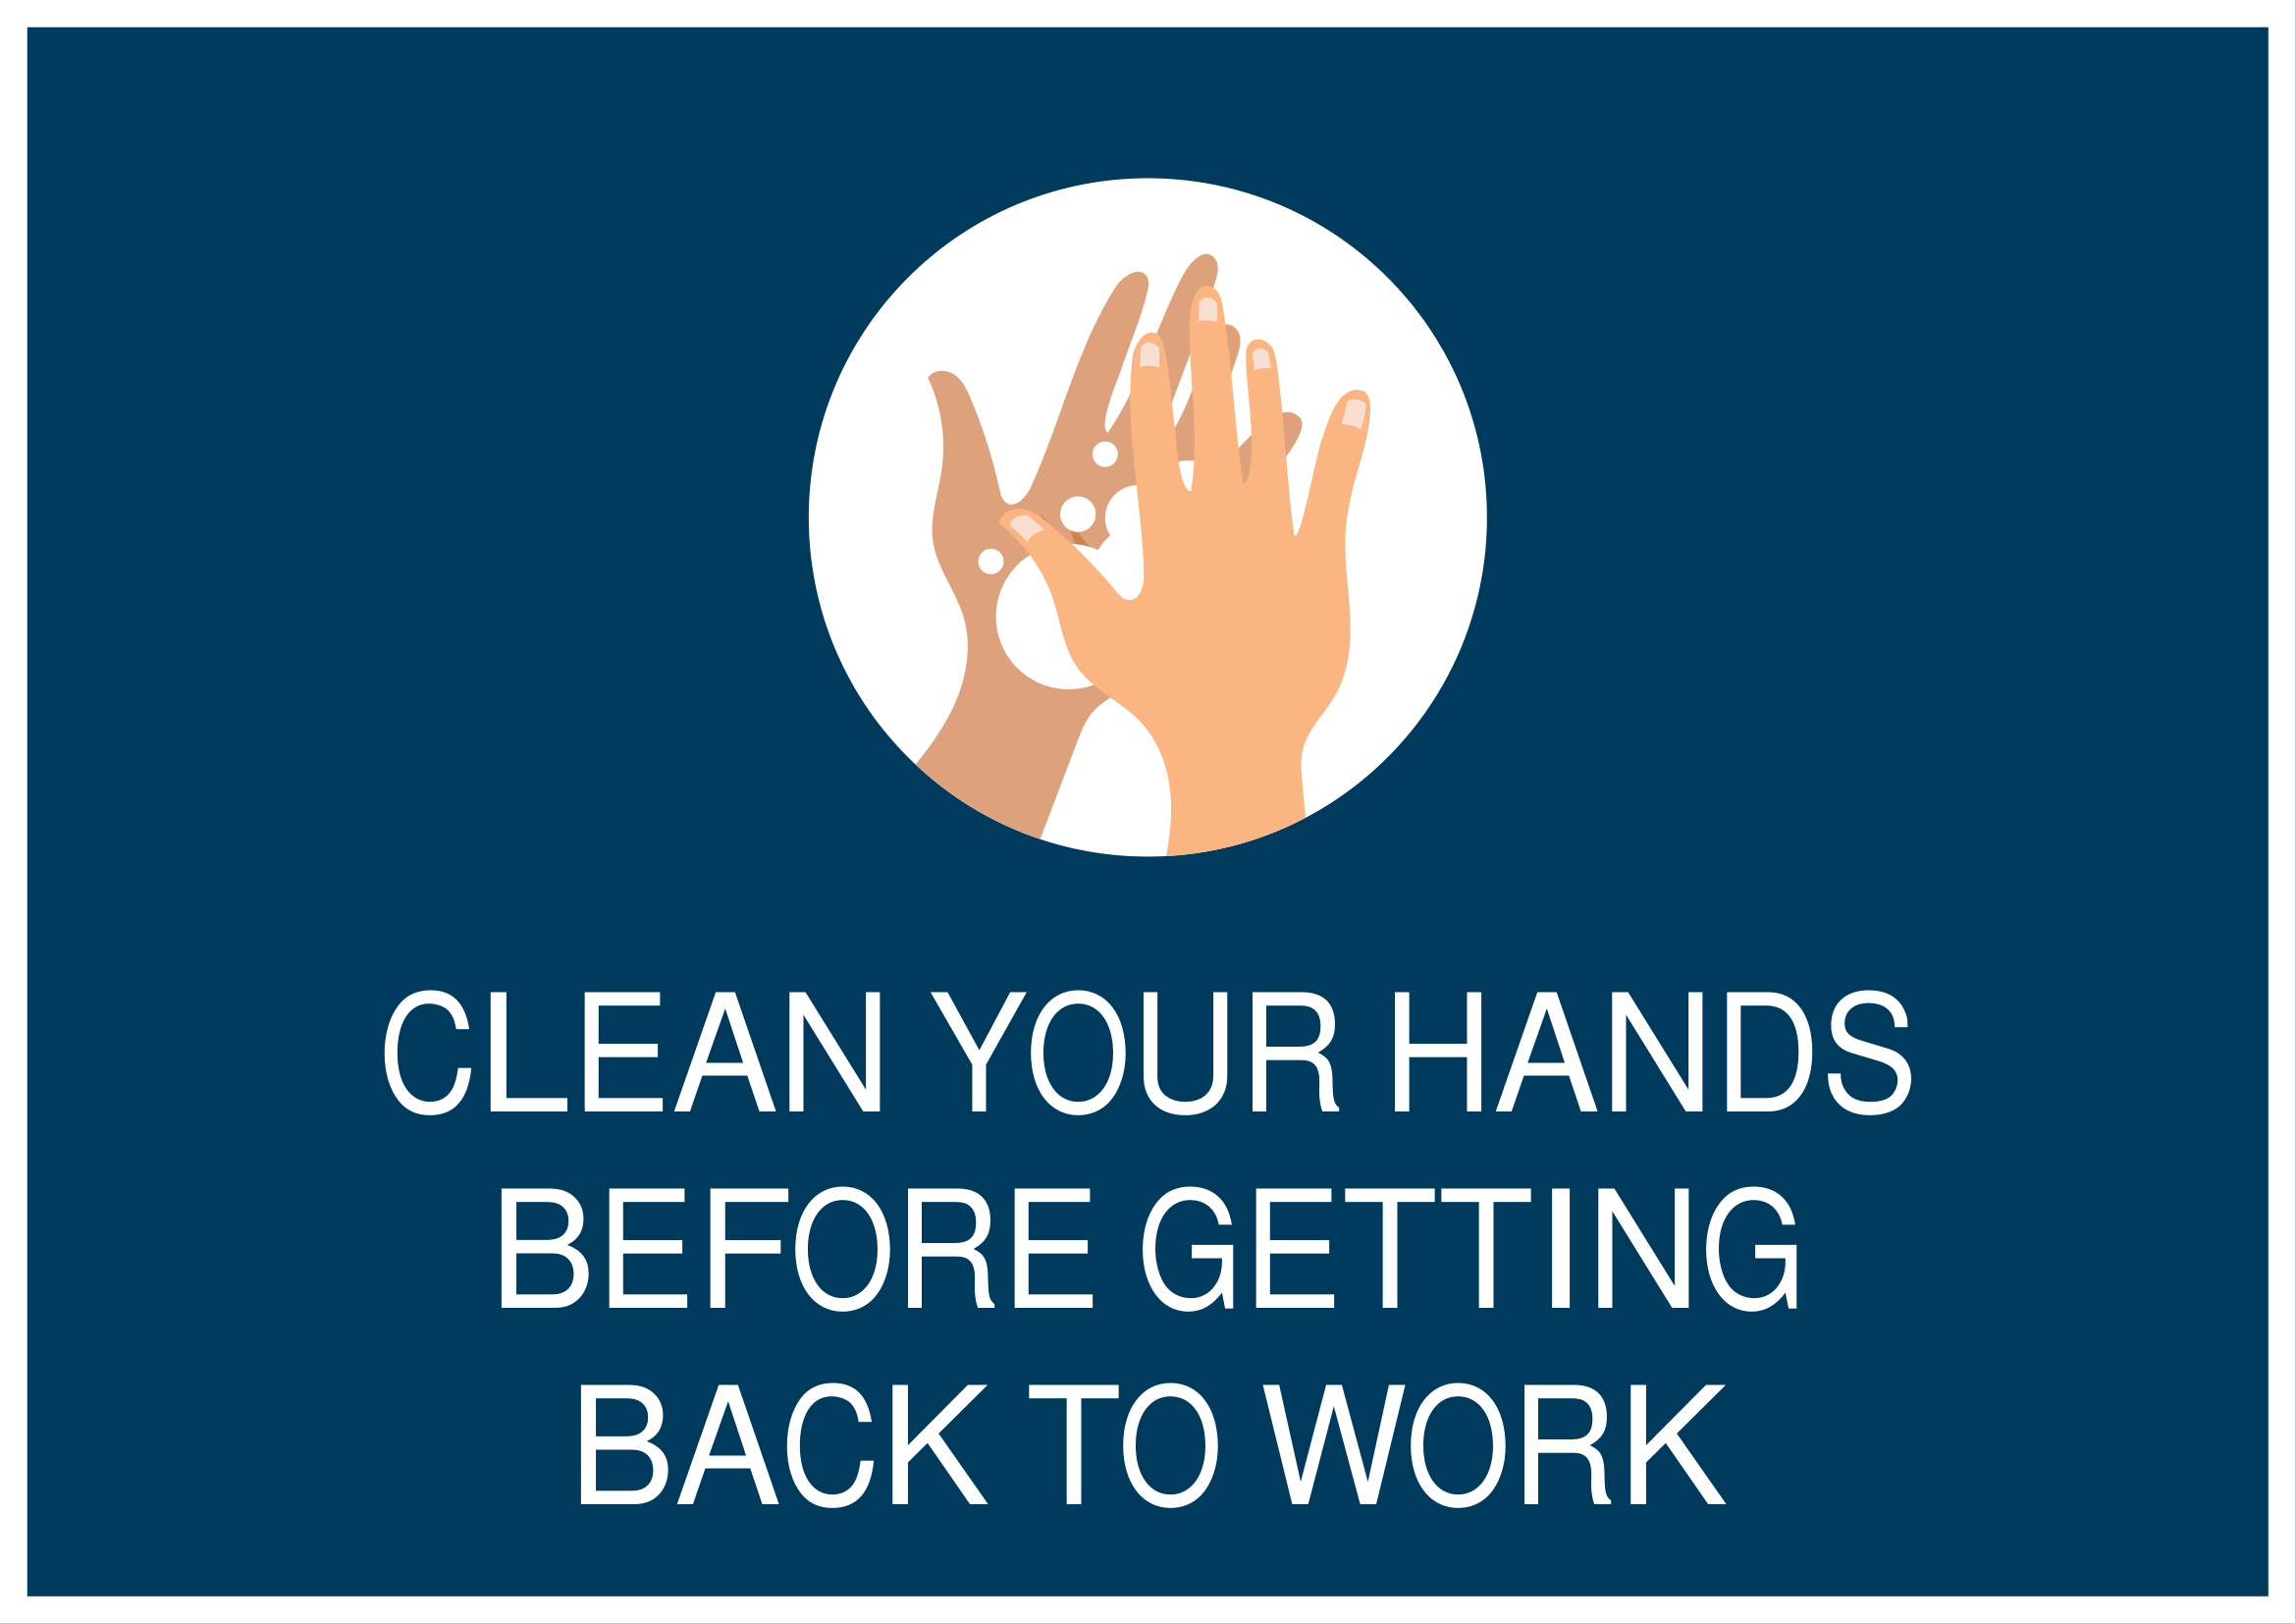 SHTK-Signage - Clean your hand before getting back to work